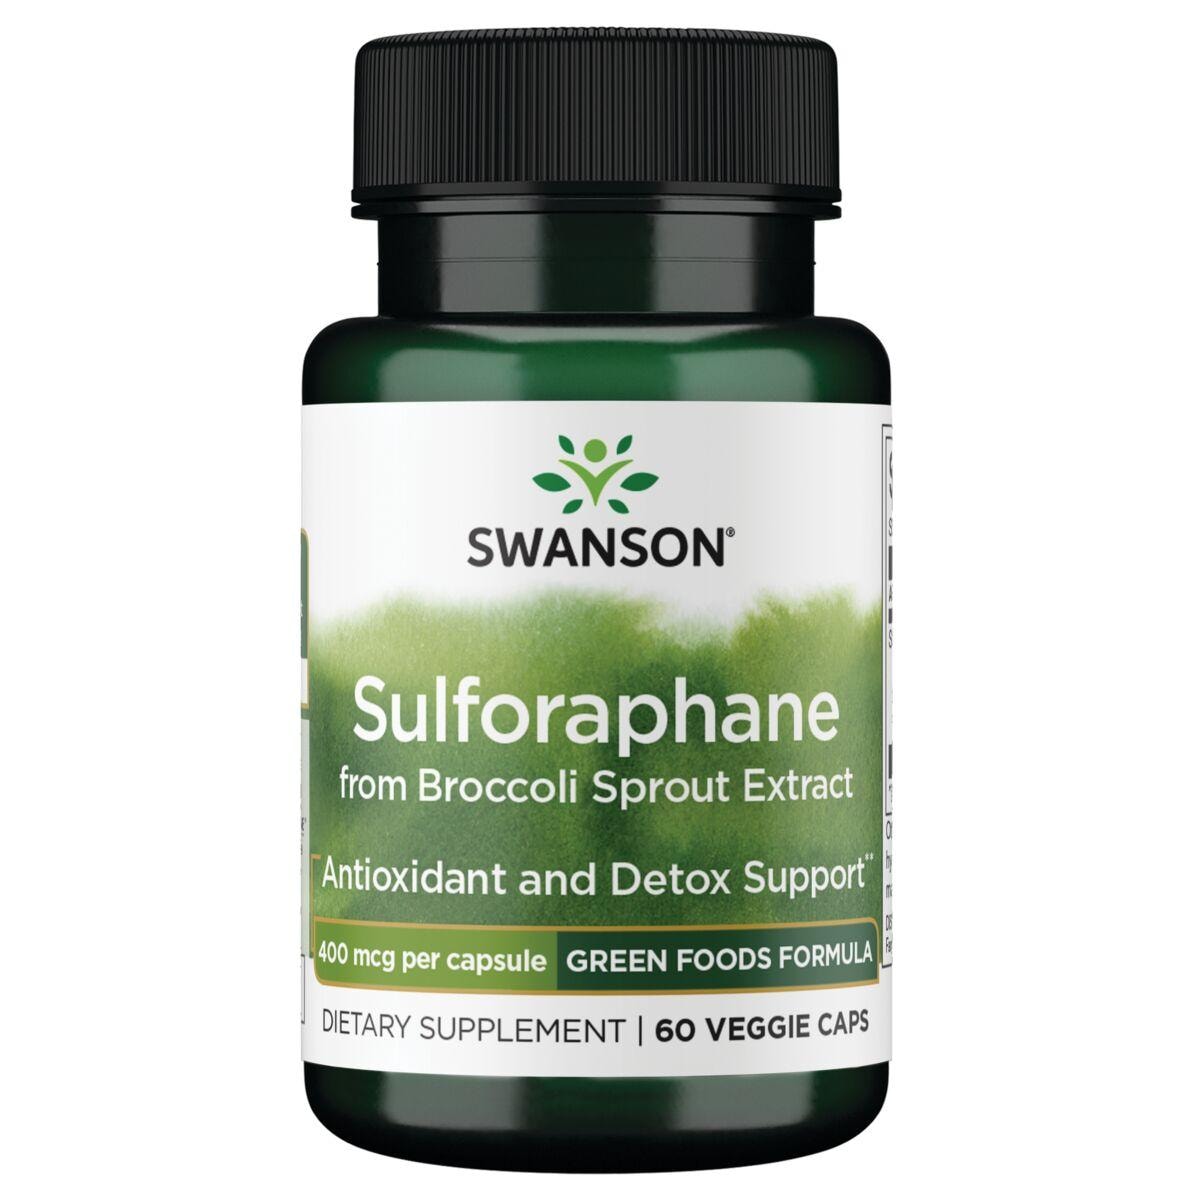 Swanson GreenFoods Formulas Sulforaphane from Broccoli Sprout Extract Supplement Vitamin | 400 mcg | 60 Veg Caps